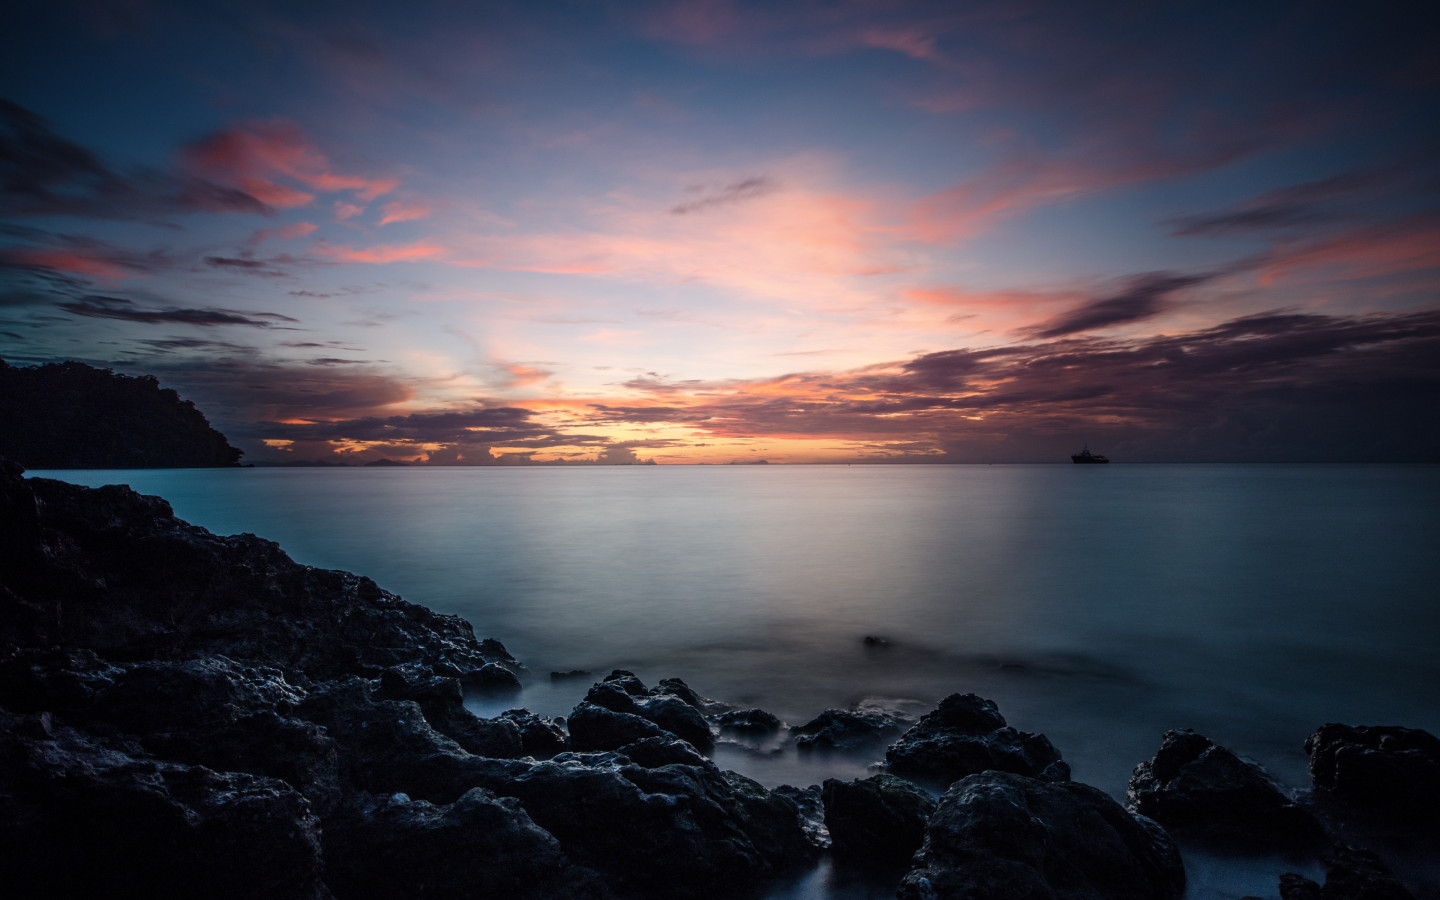 Sunset, rocks, clouds, view from Thailand wallpaper 1440x900